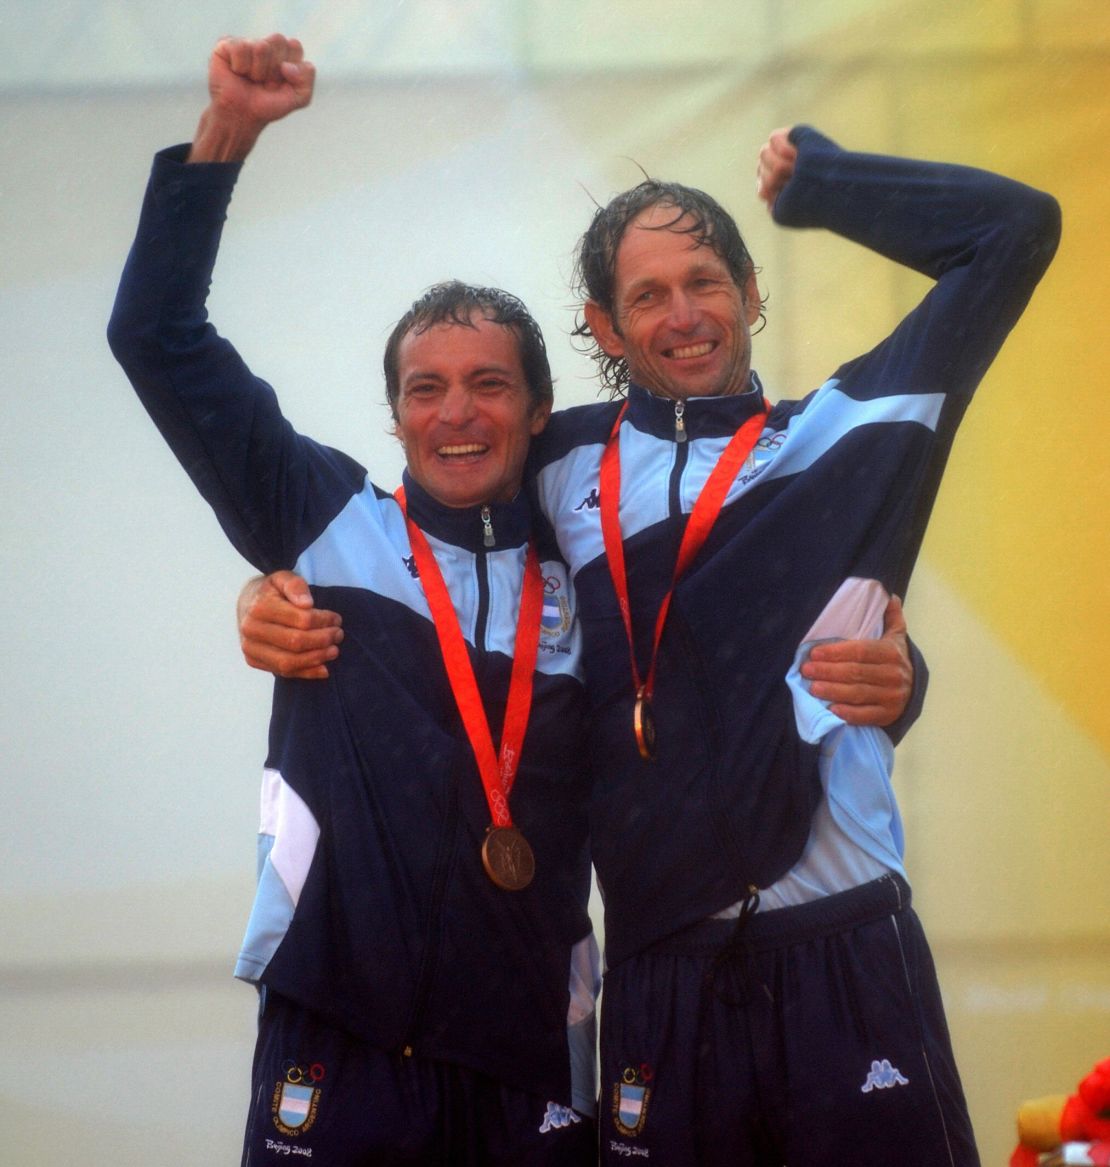 Lange (R) and Carlos Espinola won bronze in the Tornado class at the 2008 Beijing Olympics.